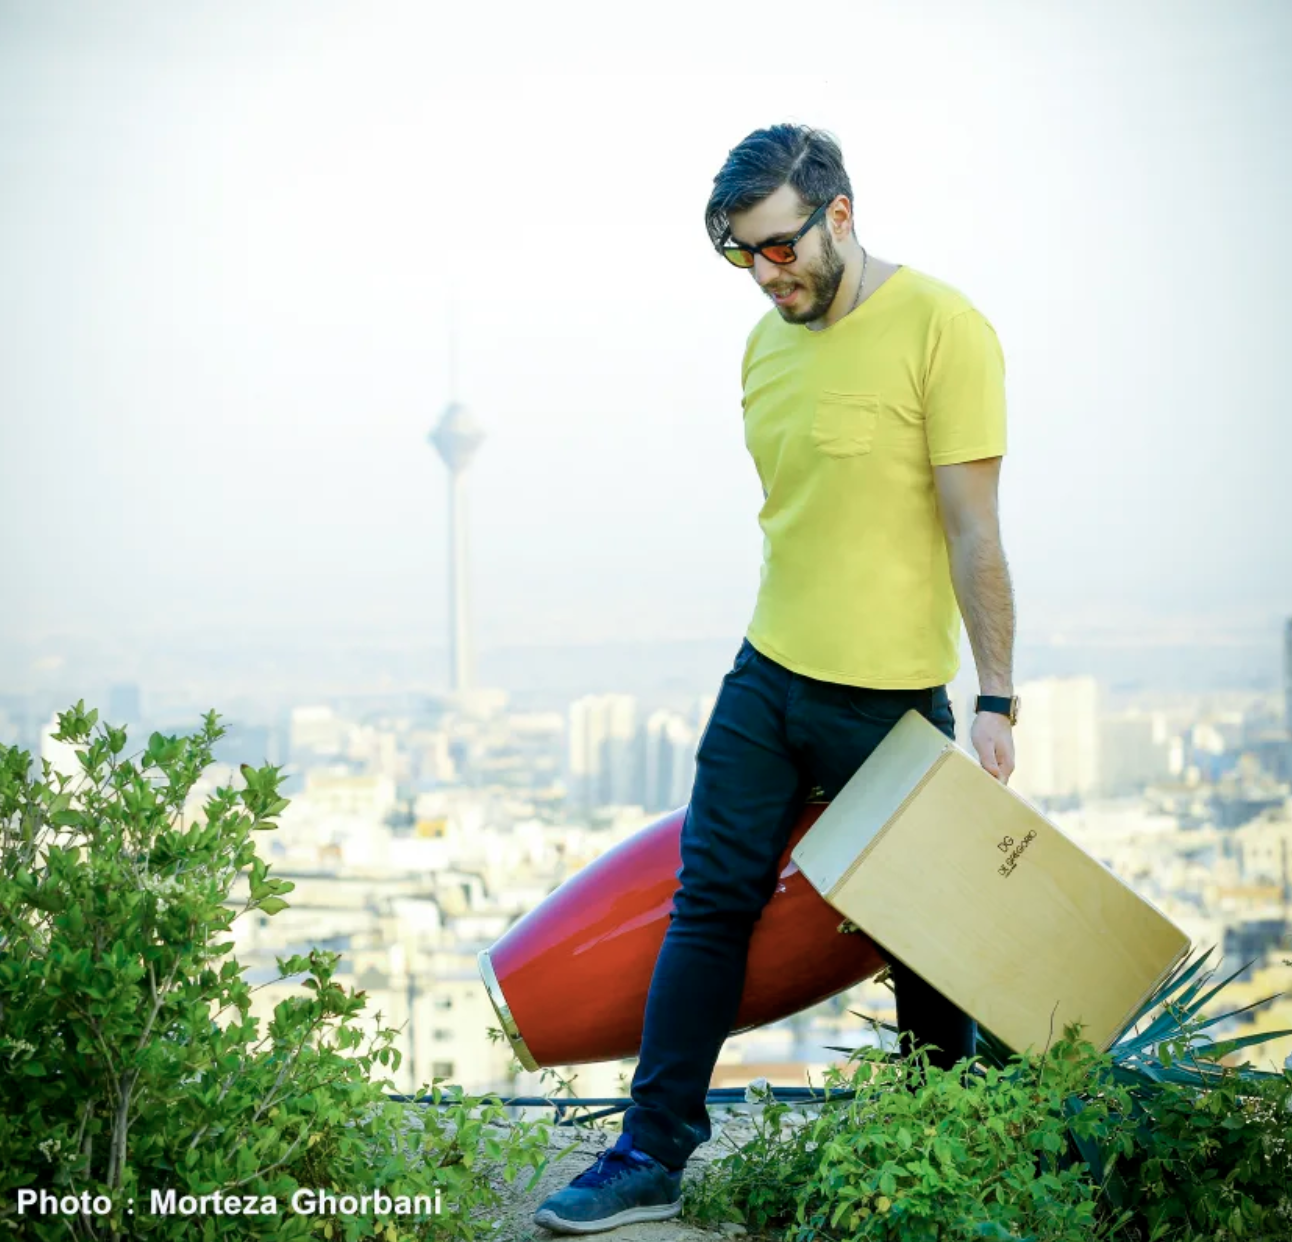 How Mohammad Shabani Is Dominating the Iranian Music Industry as a Self-Taught Percussionist